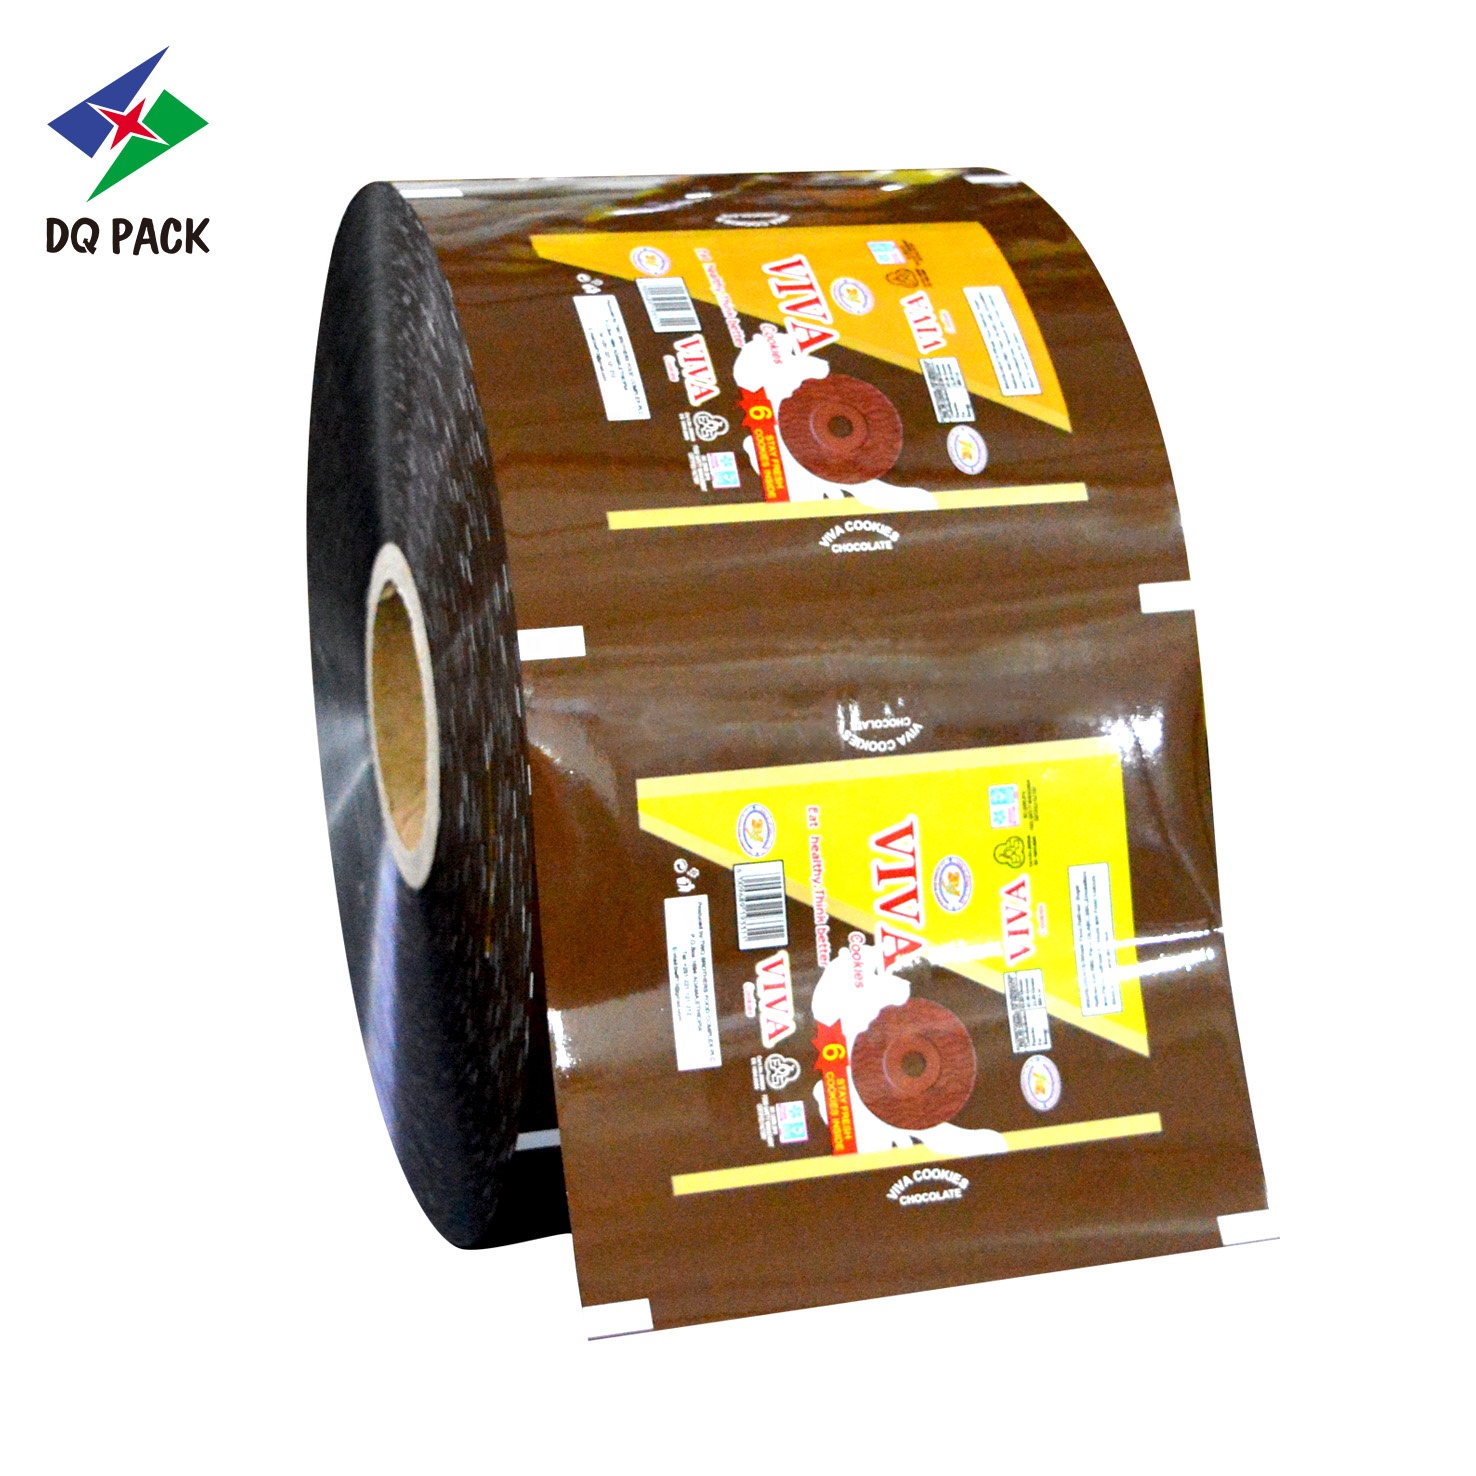 DQ PACK China Supplier high quality products plastic food cake biscuit chips laminating flexible packaging sachet roll film